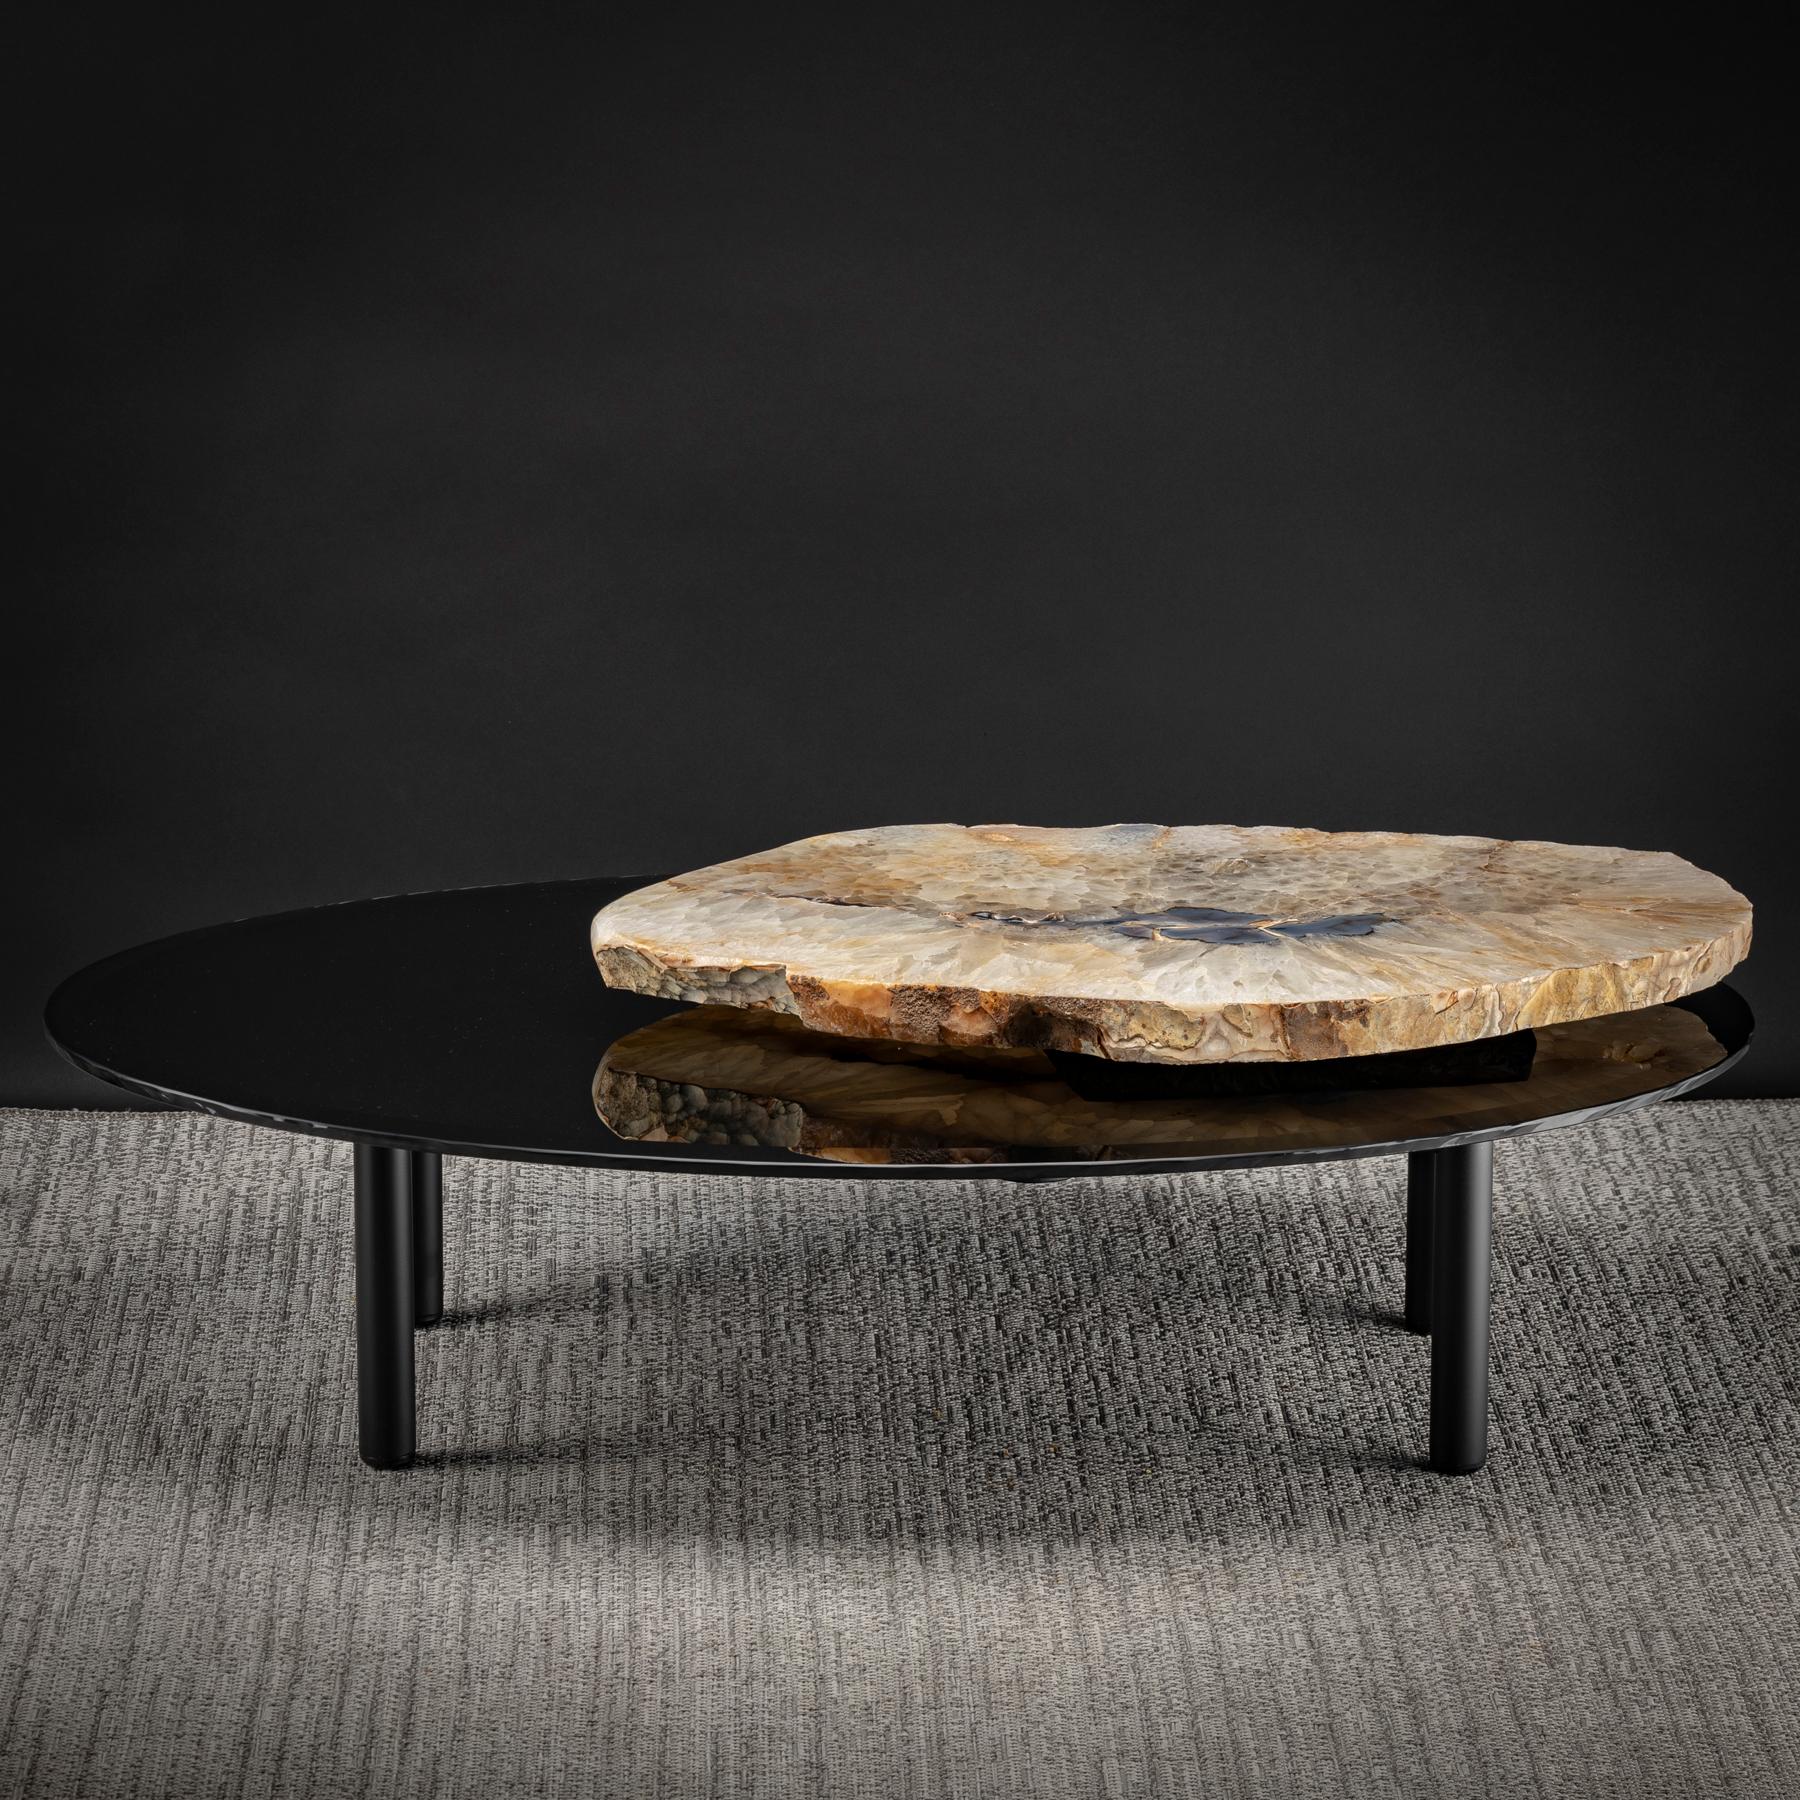 This center table is an original design featuring a 3-way rotating Brazilian Agate.
Measures

Agates are formed in rounded nodules, which are sliced open to bring out the internal pattern hidden in the stone. Their formation is commonly from